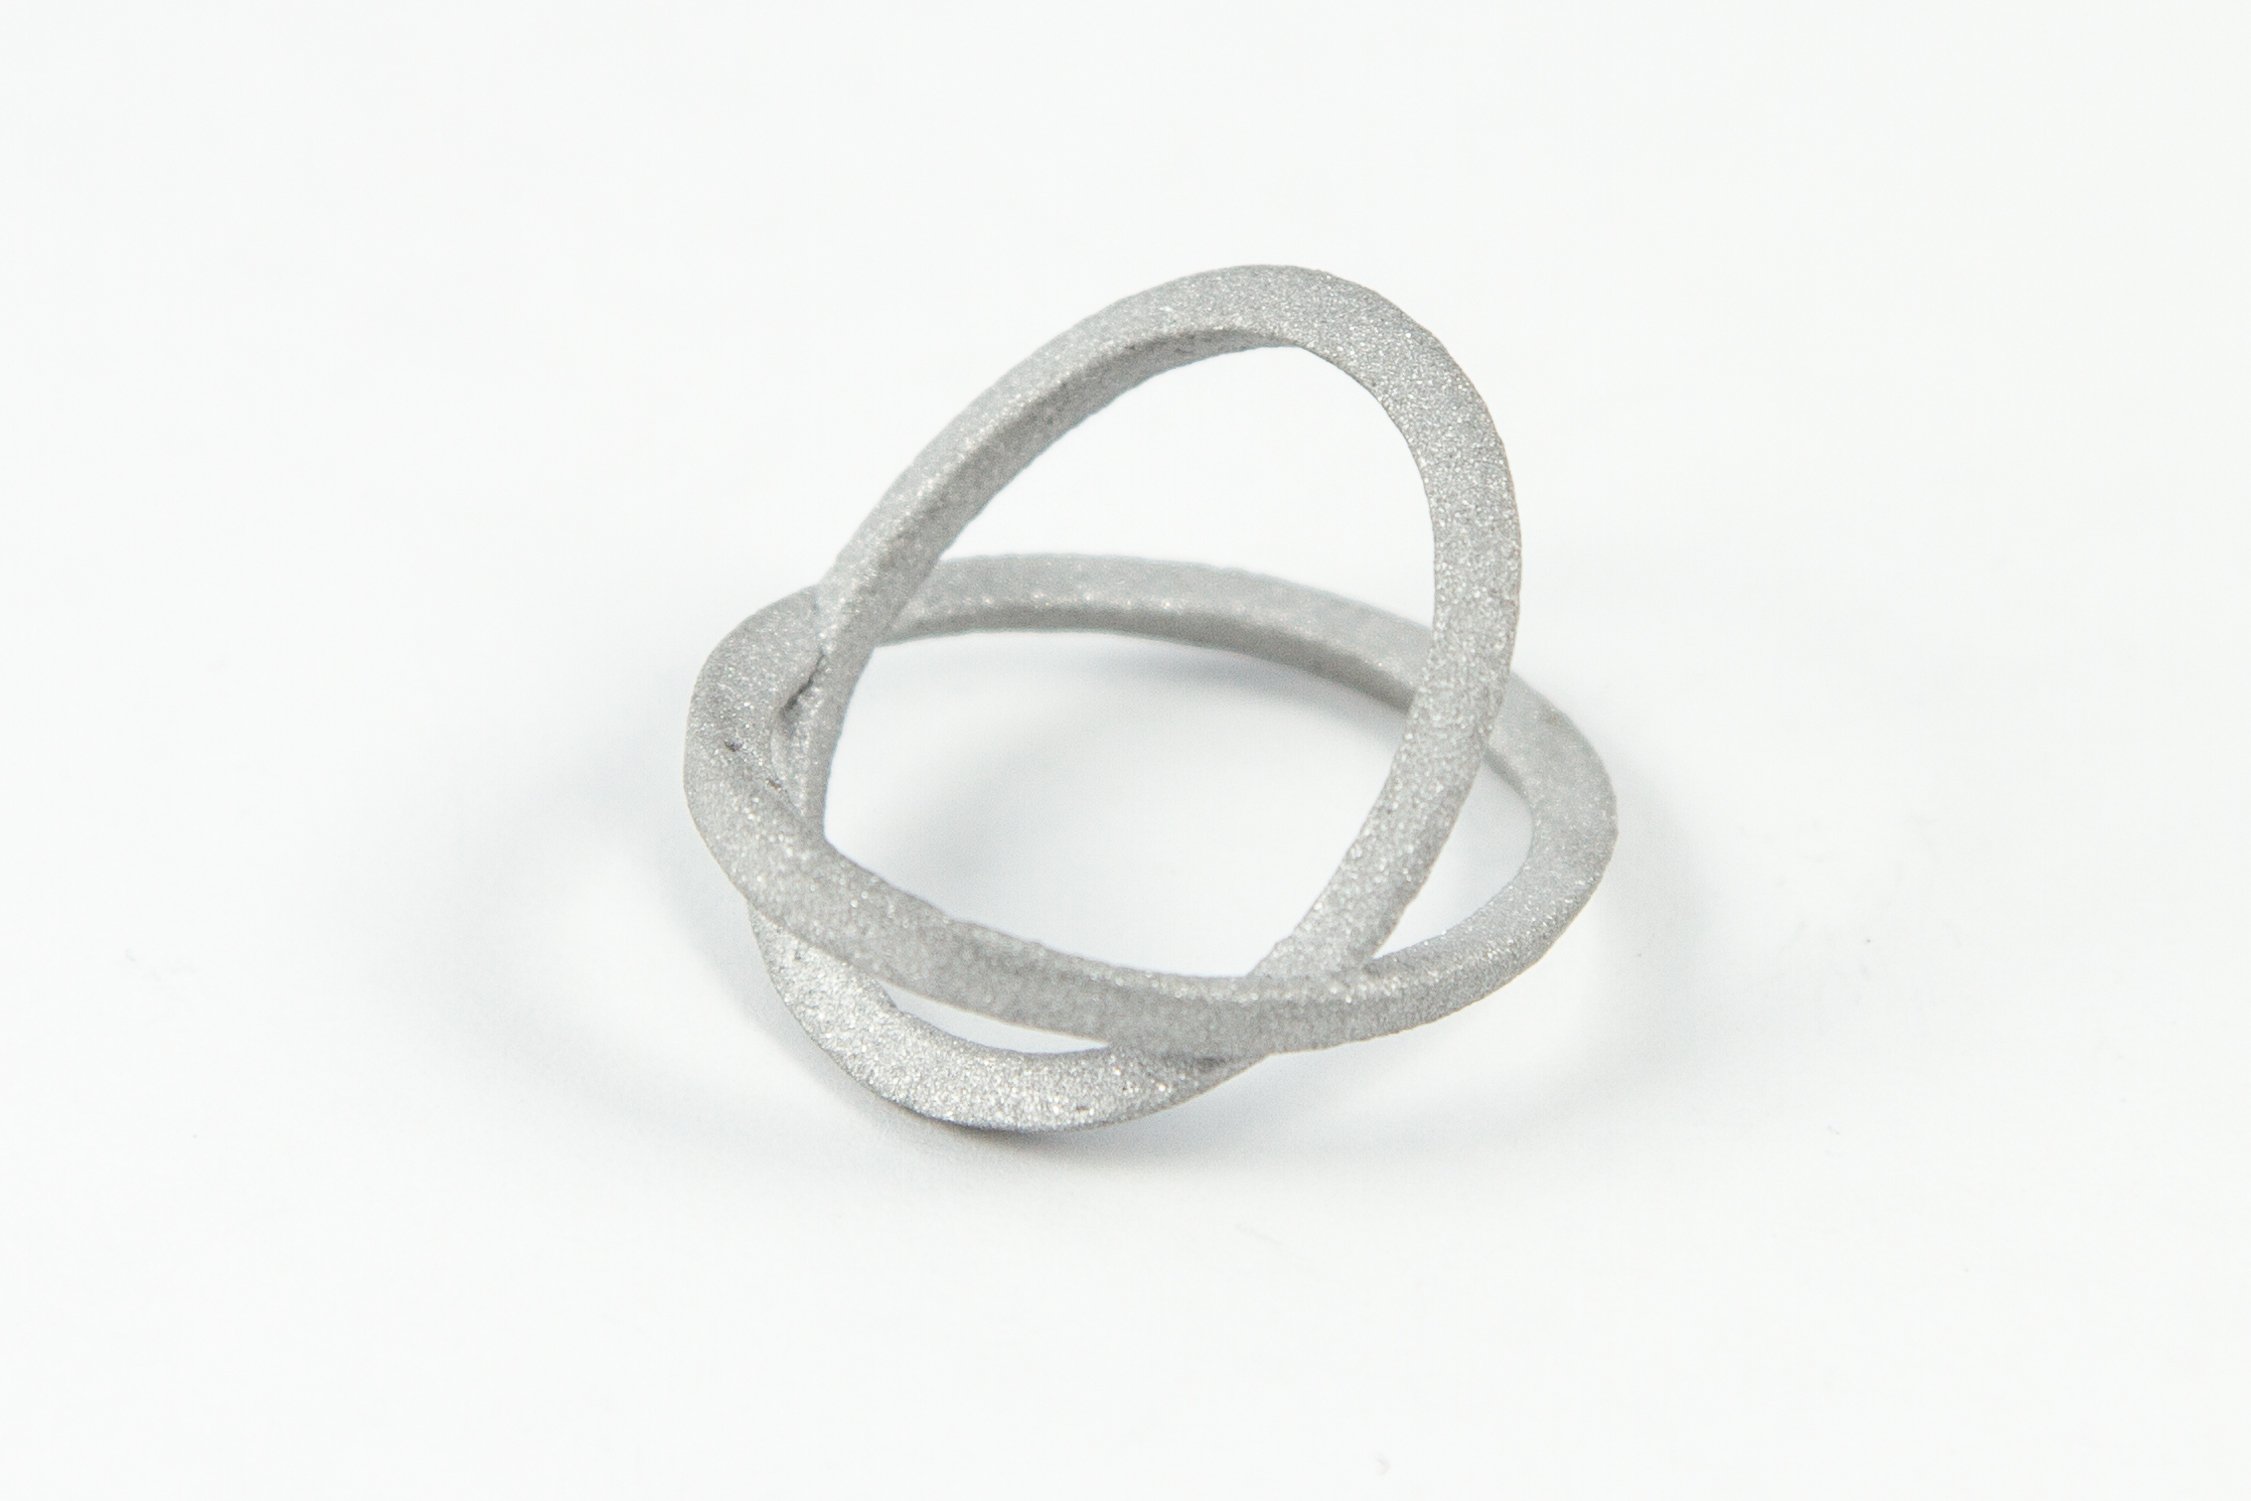 3D Print with Silver - Shapeways